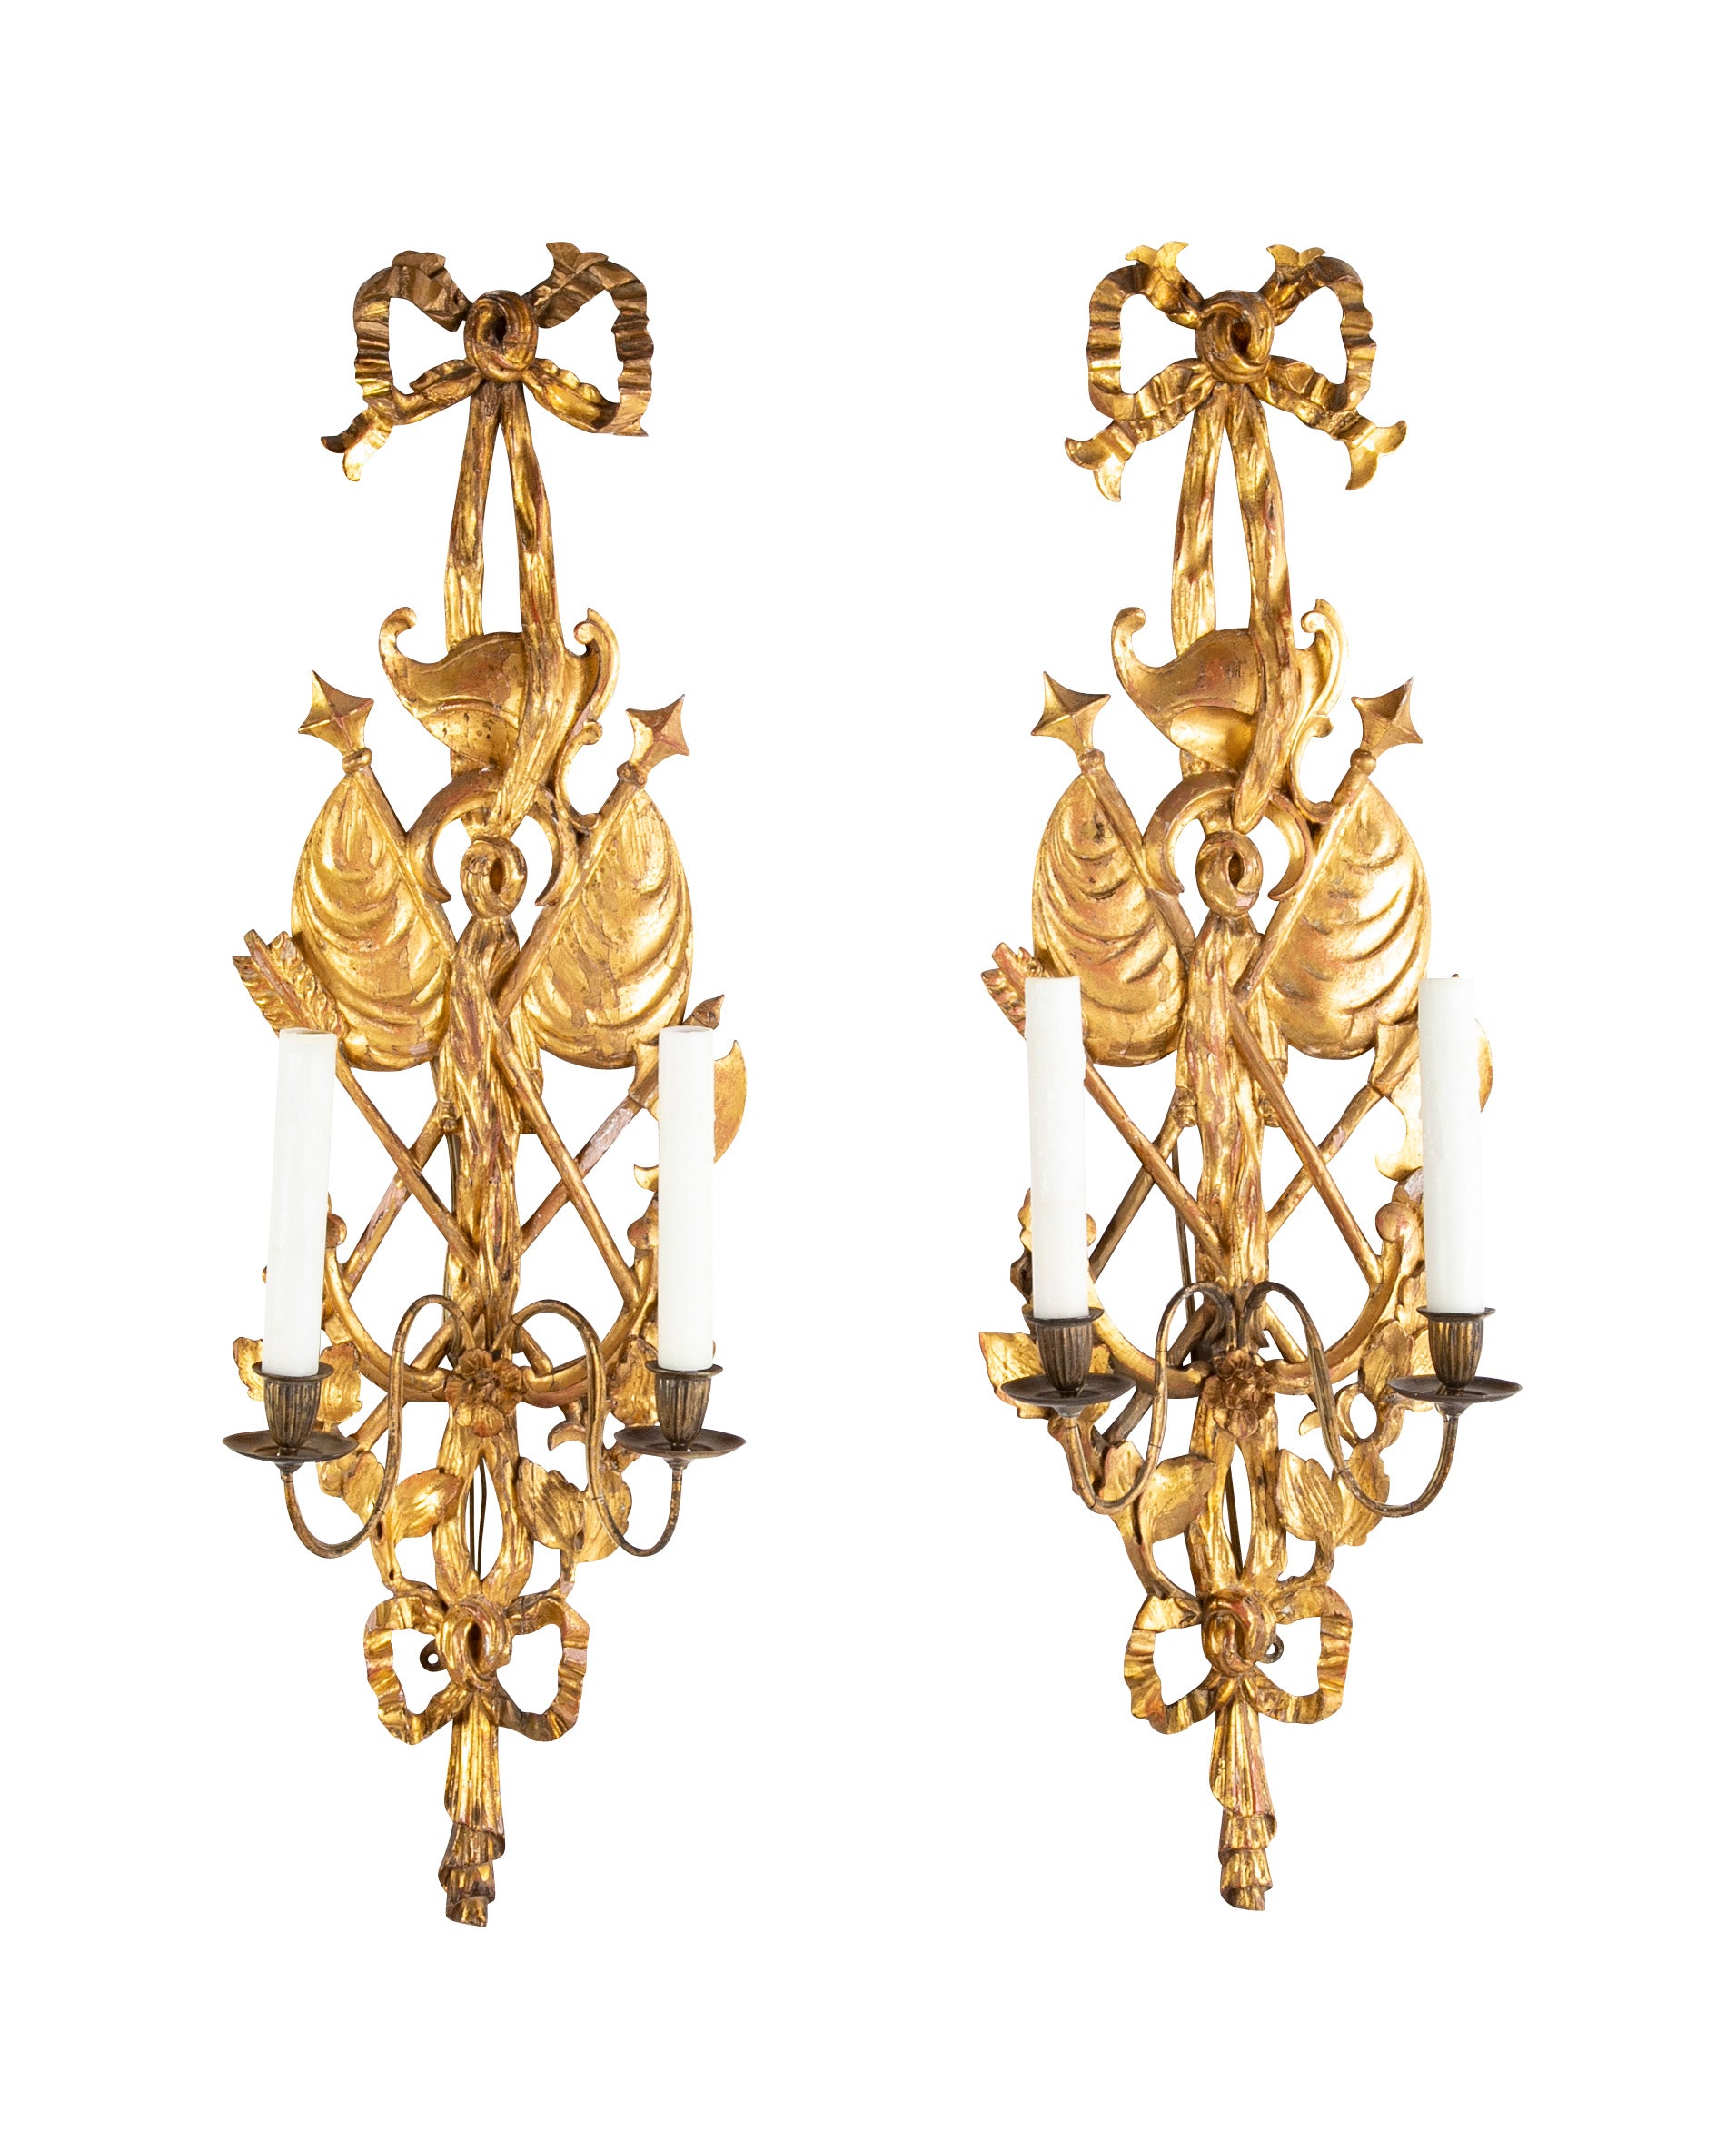 Pair of Italian Giltwood Wall Sconces in Neoclassical Trophy Form